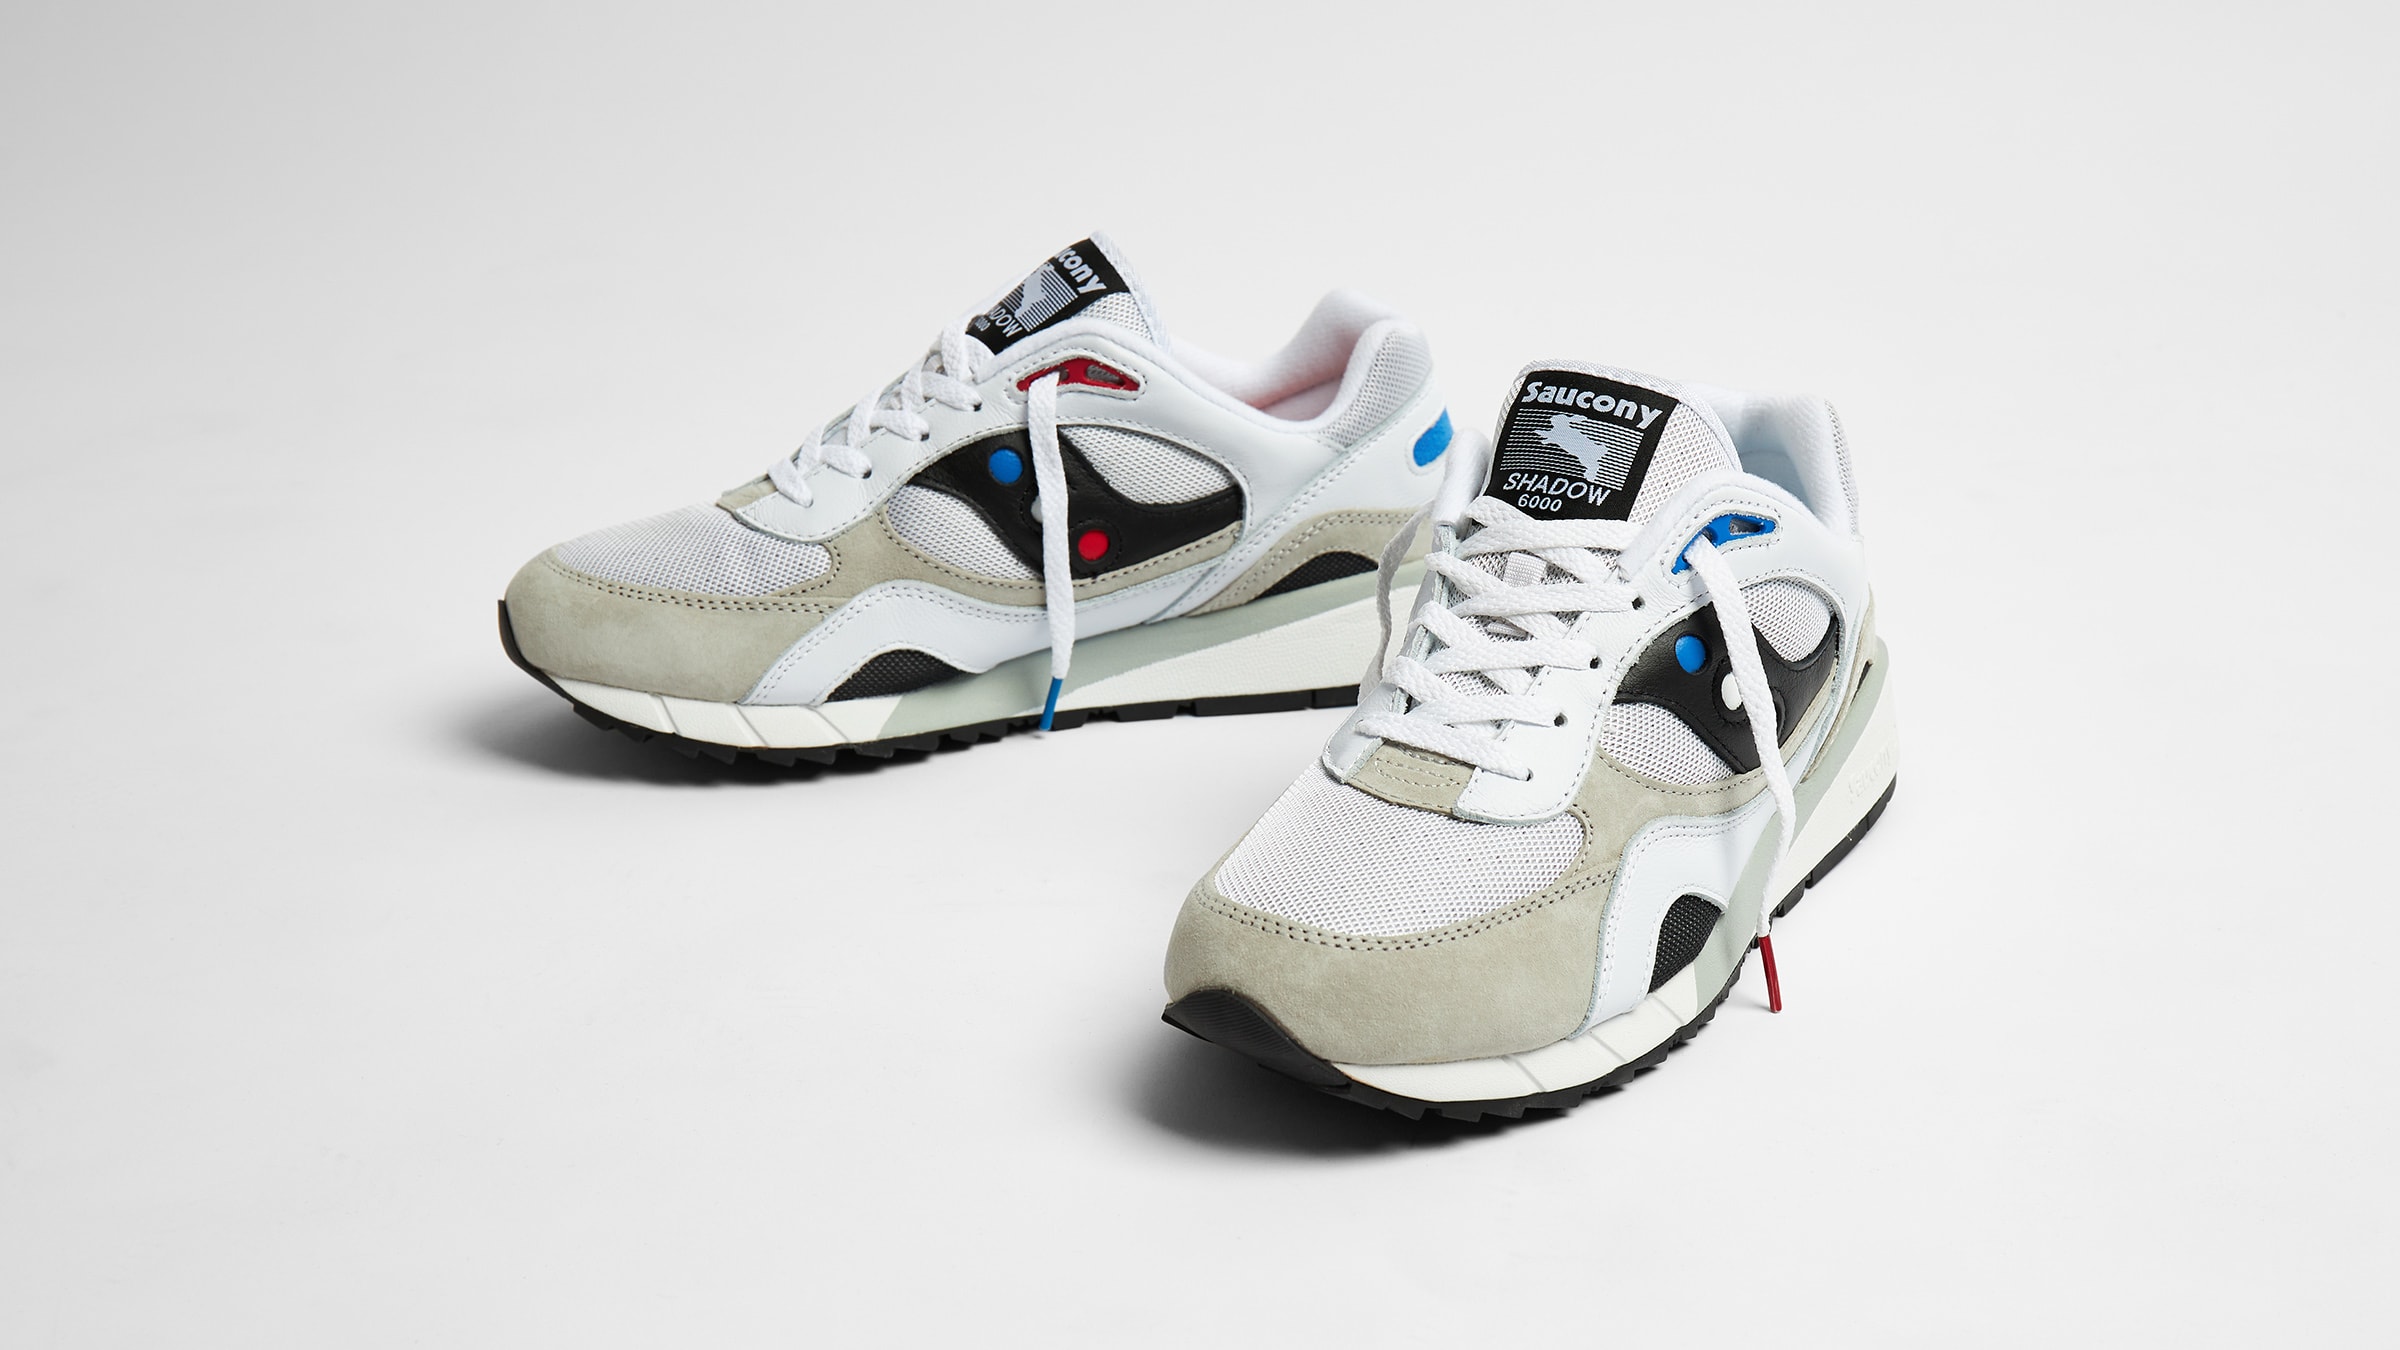 Saucony x Extra Butter Shadow 6000 'Rabbit Hole' (White) | END. Launches